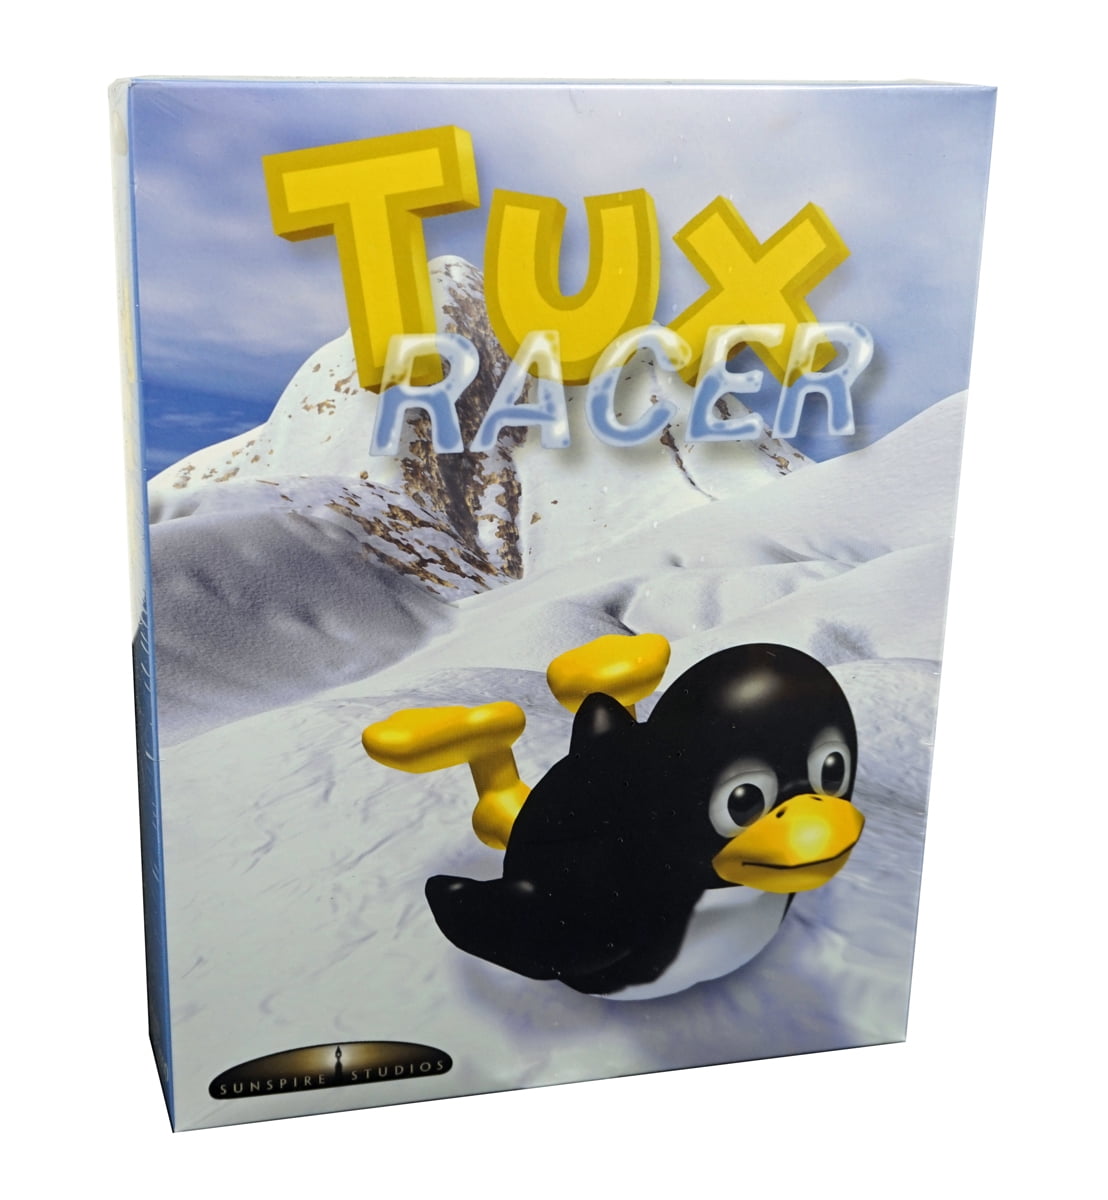 Tux Racer Pc Game Watch Tux The Penguin Race Down The Snow Covered Mountains 18 Challenging Courses Walmart Com Walmart Com - how roblox went down hill roblox amino